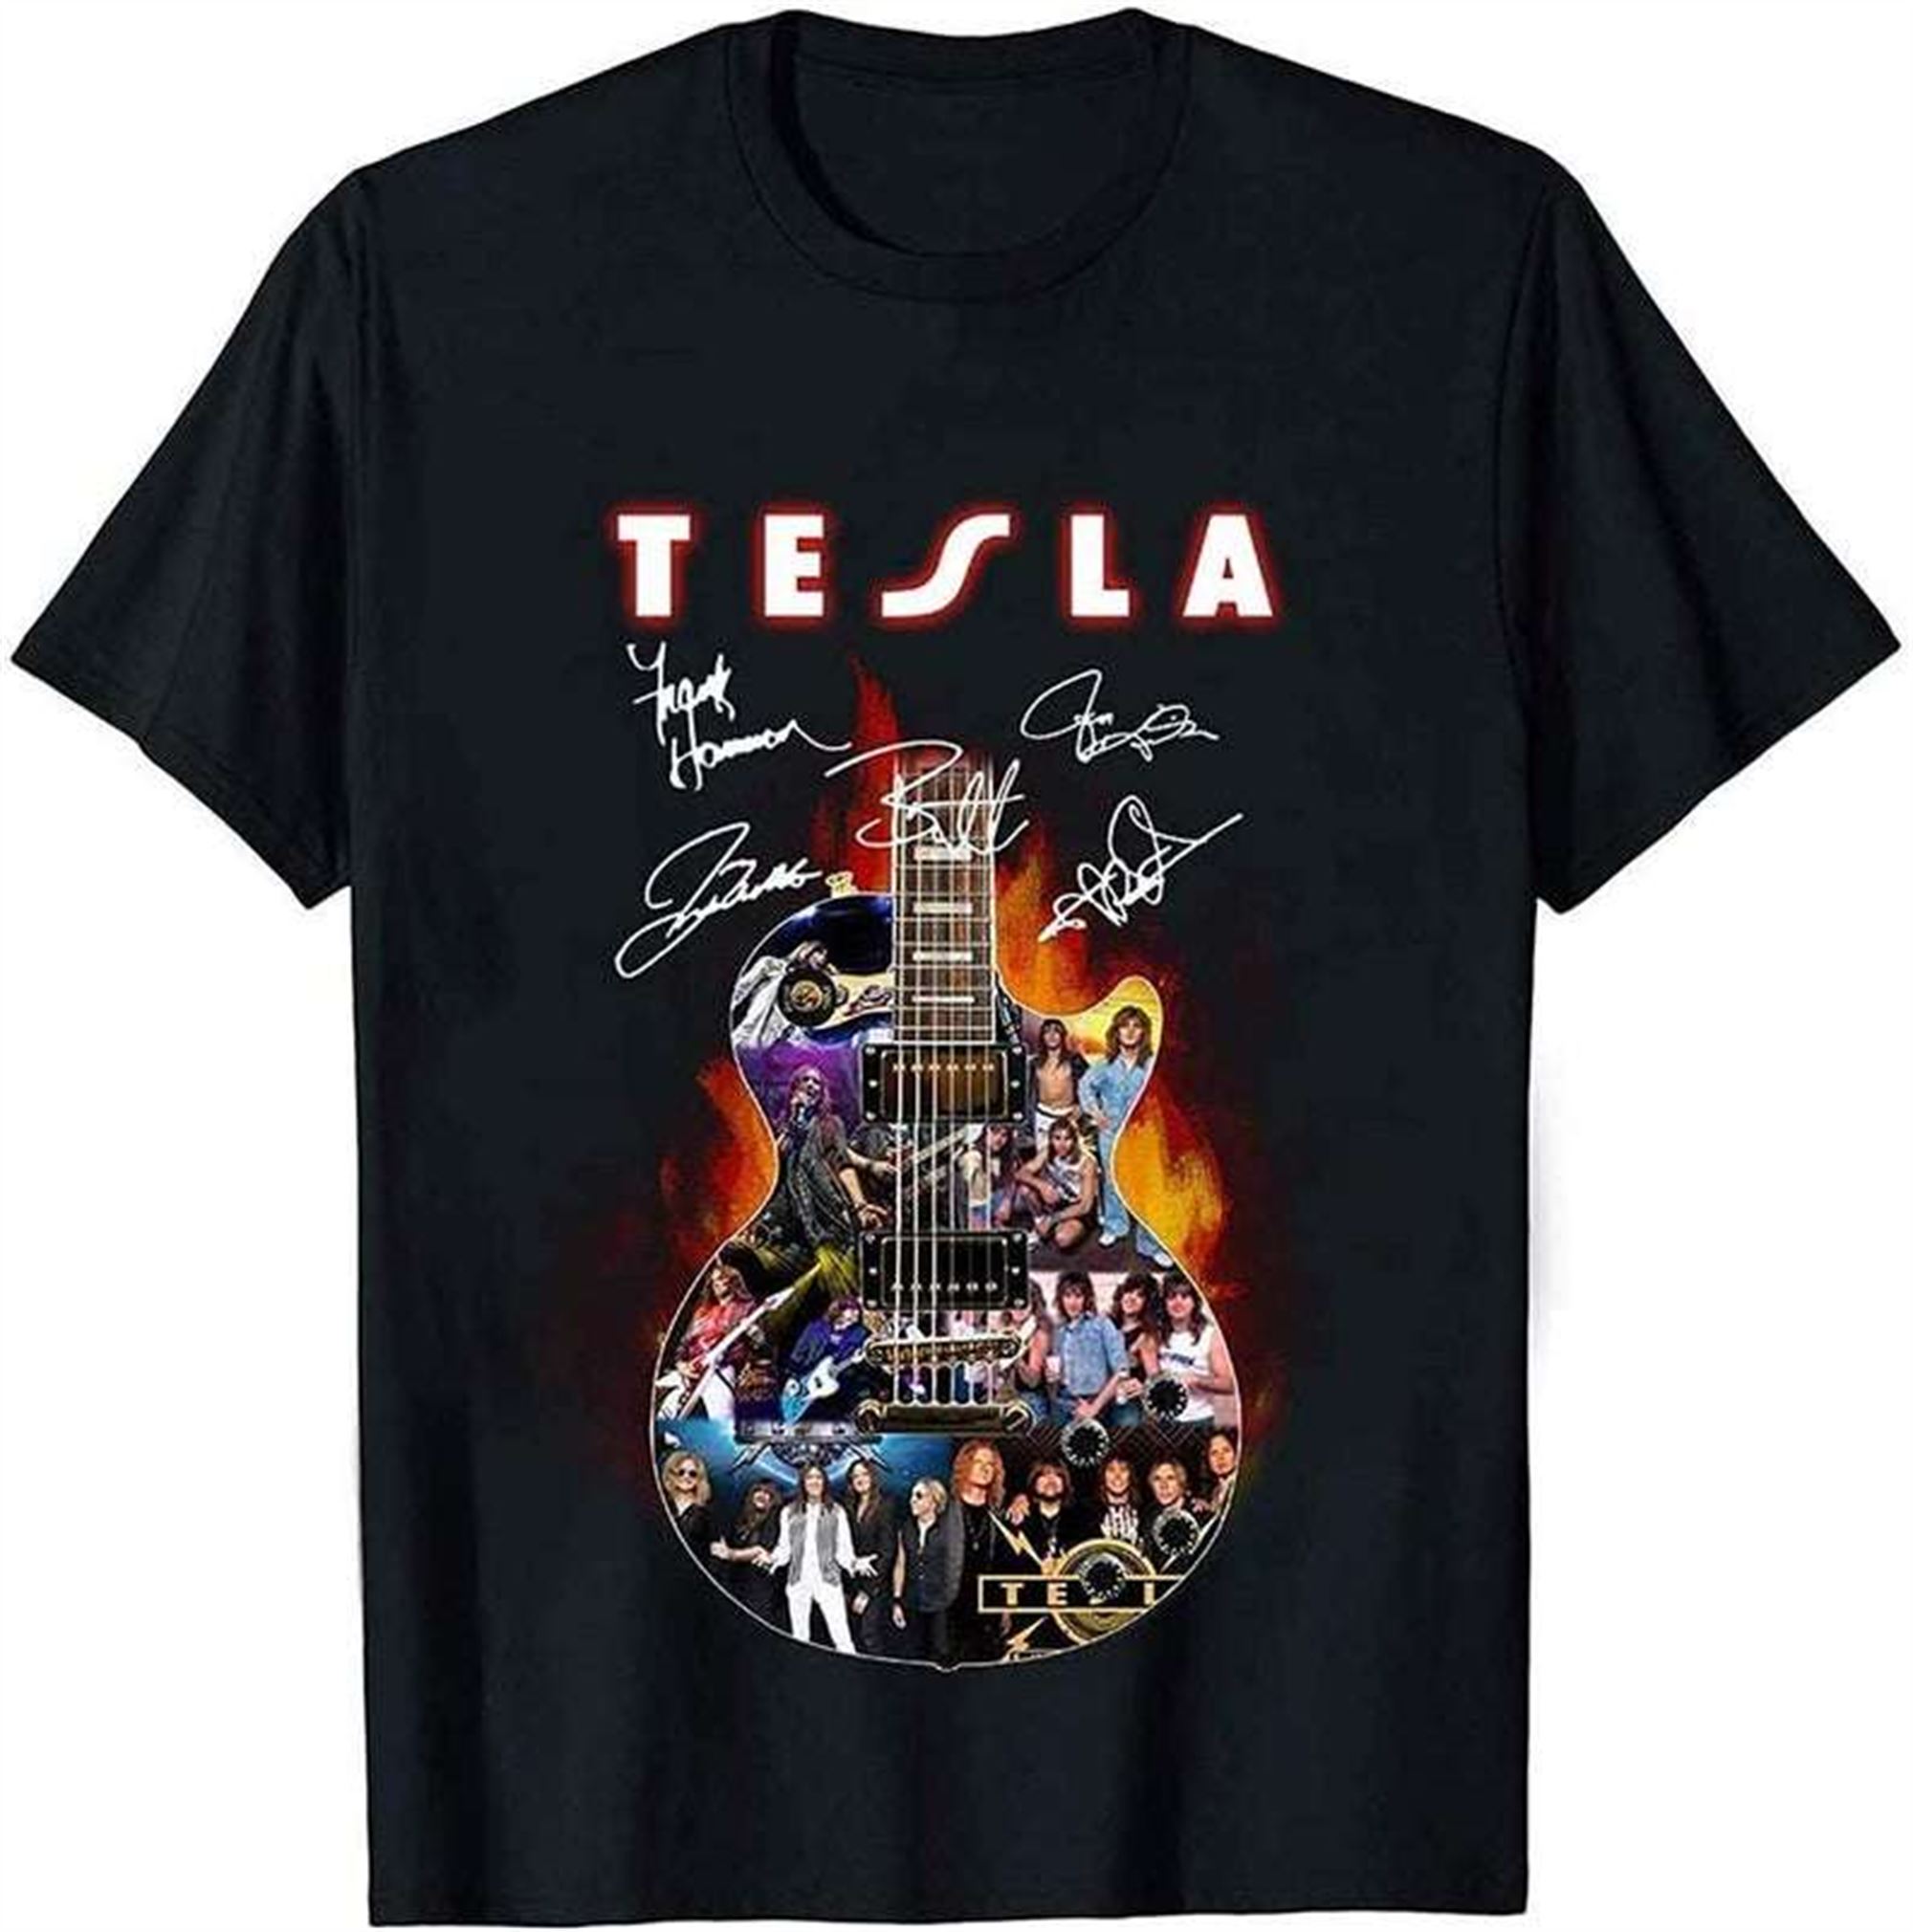 Tesla Band Rock Band Album Cover Photo Guitar And Signed Gift For Band Lovers T-shirt Size Up To 5xl